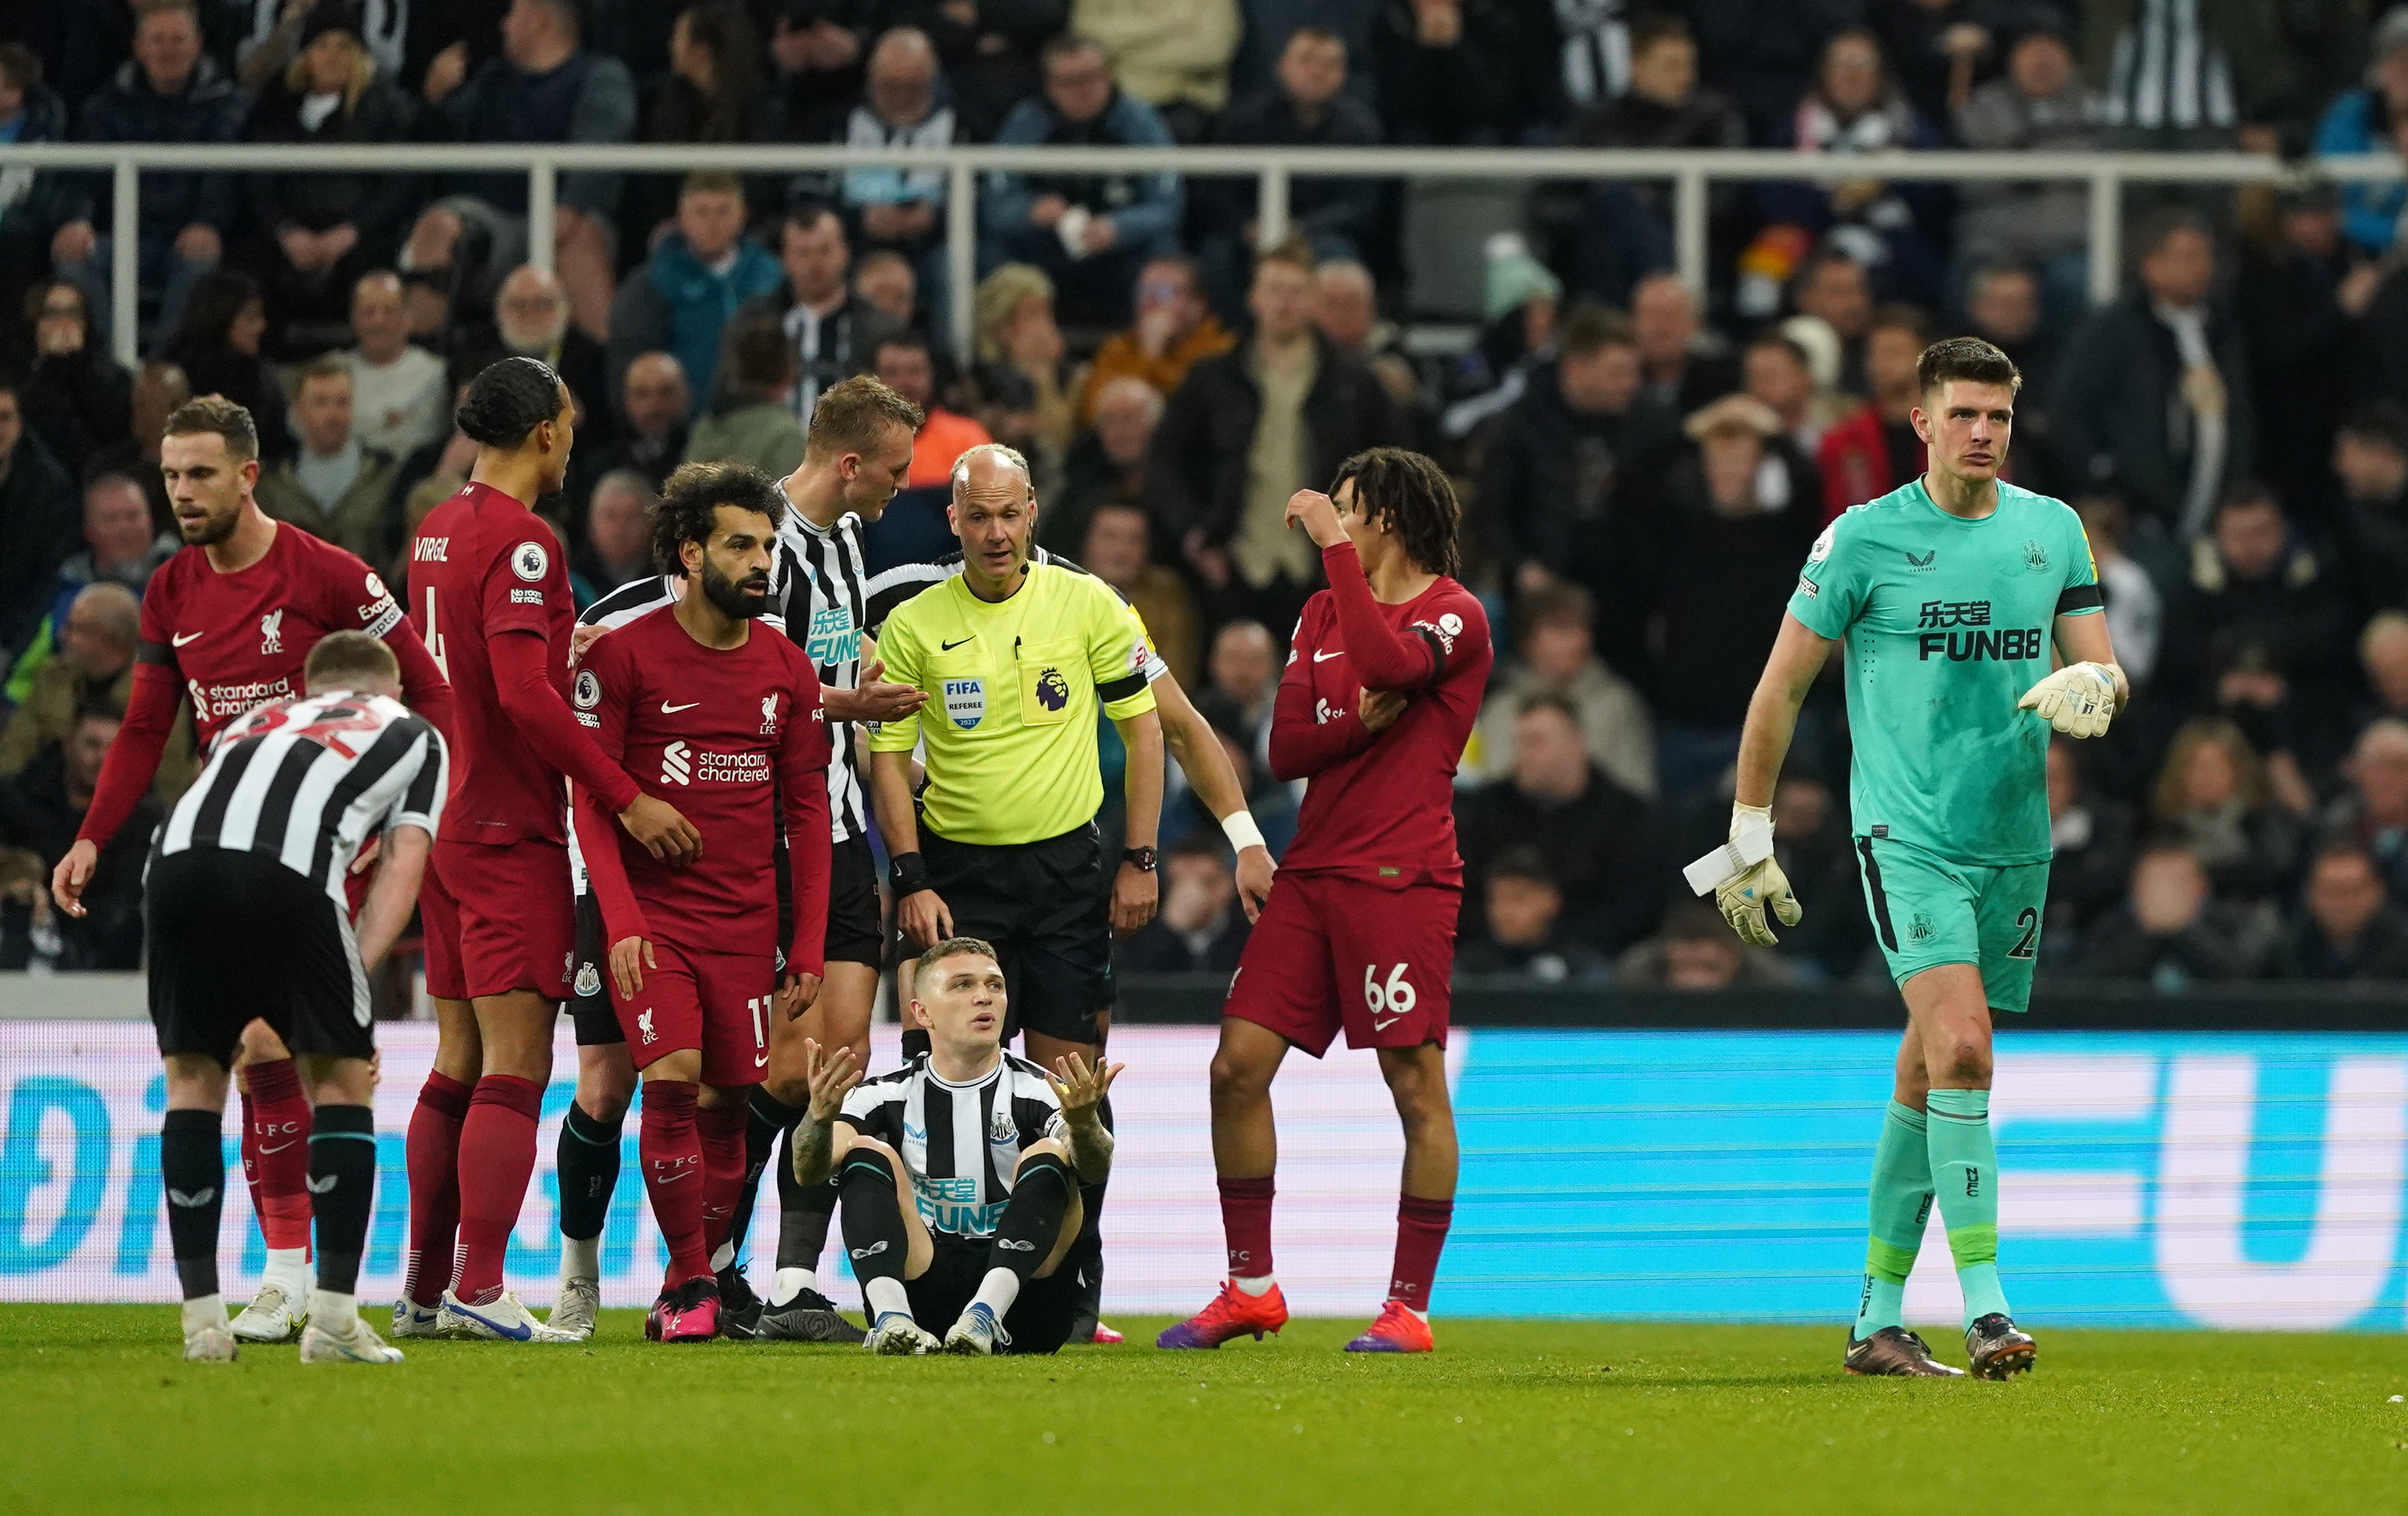 Newcastle keeper Nick Pope (right) leaves the pitch after being being shown a red card against Liverpool